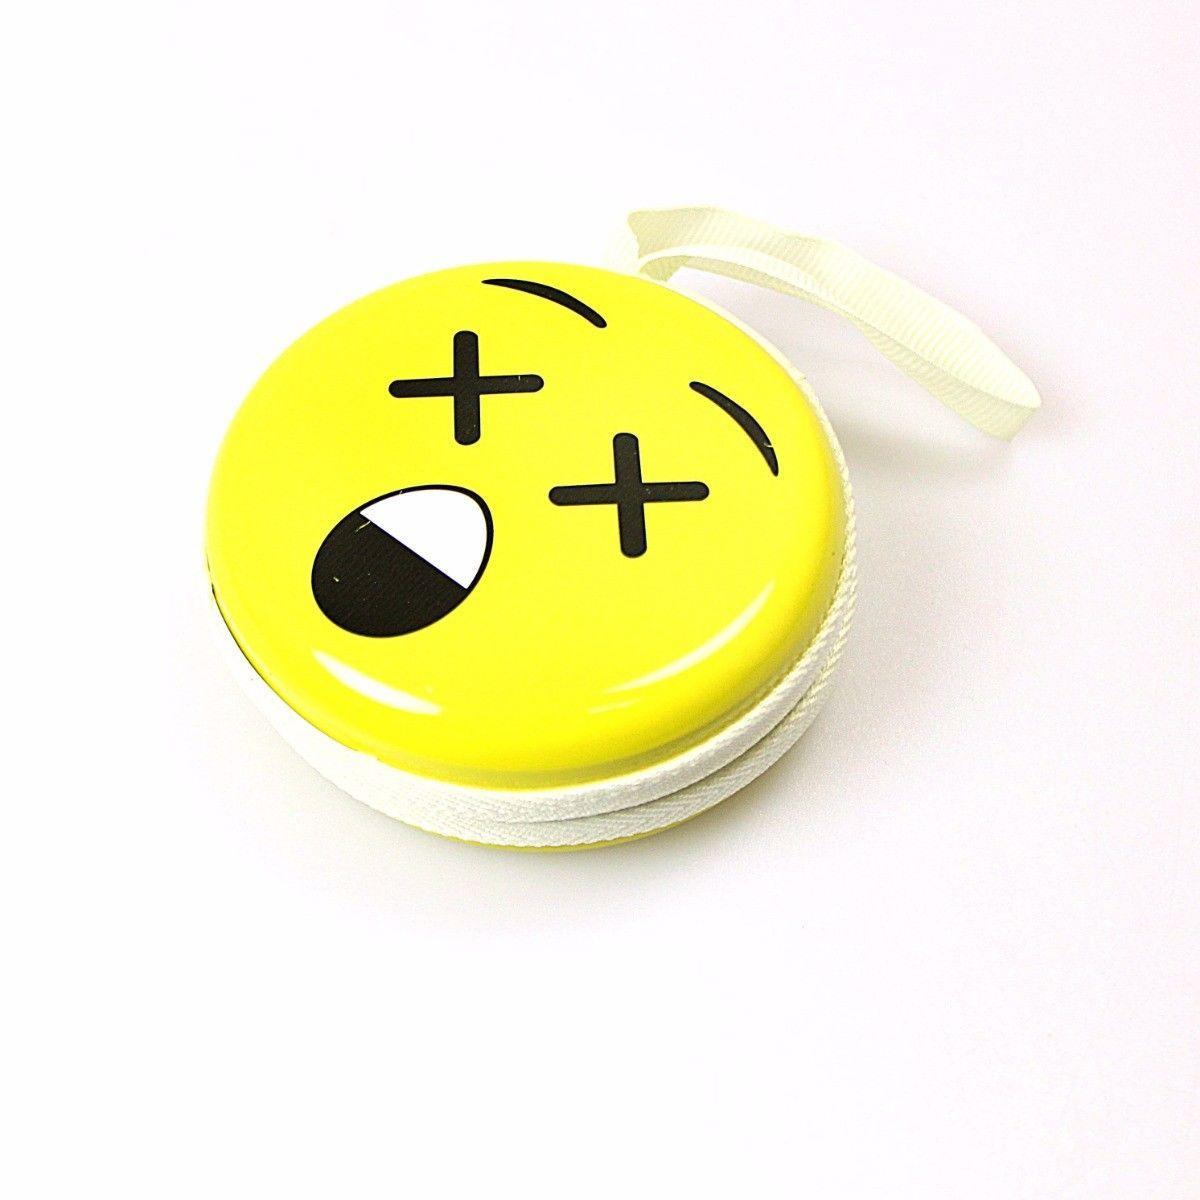 Assorted Emoji Face Earphone Pouch 7.5cm x 7cm   4496 (Large Letter Rate)